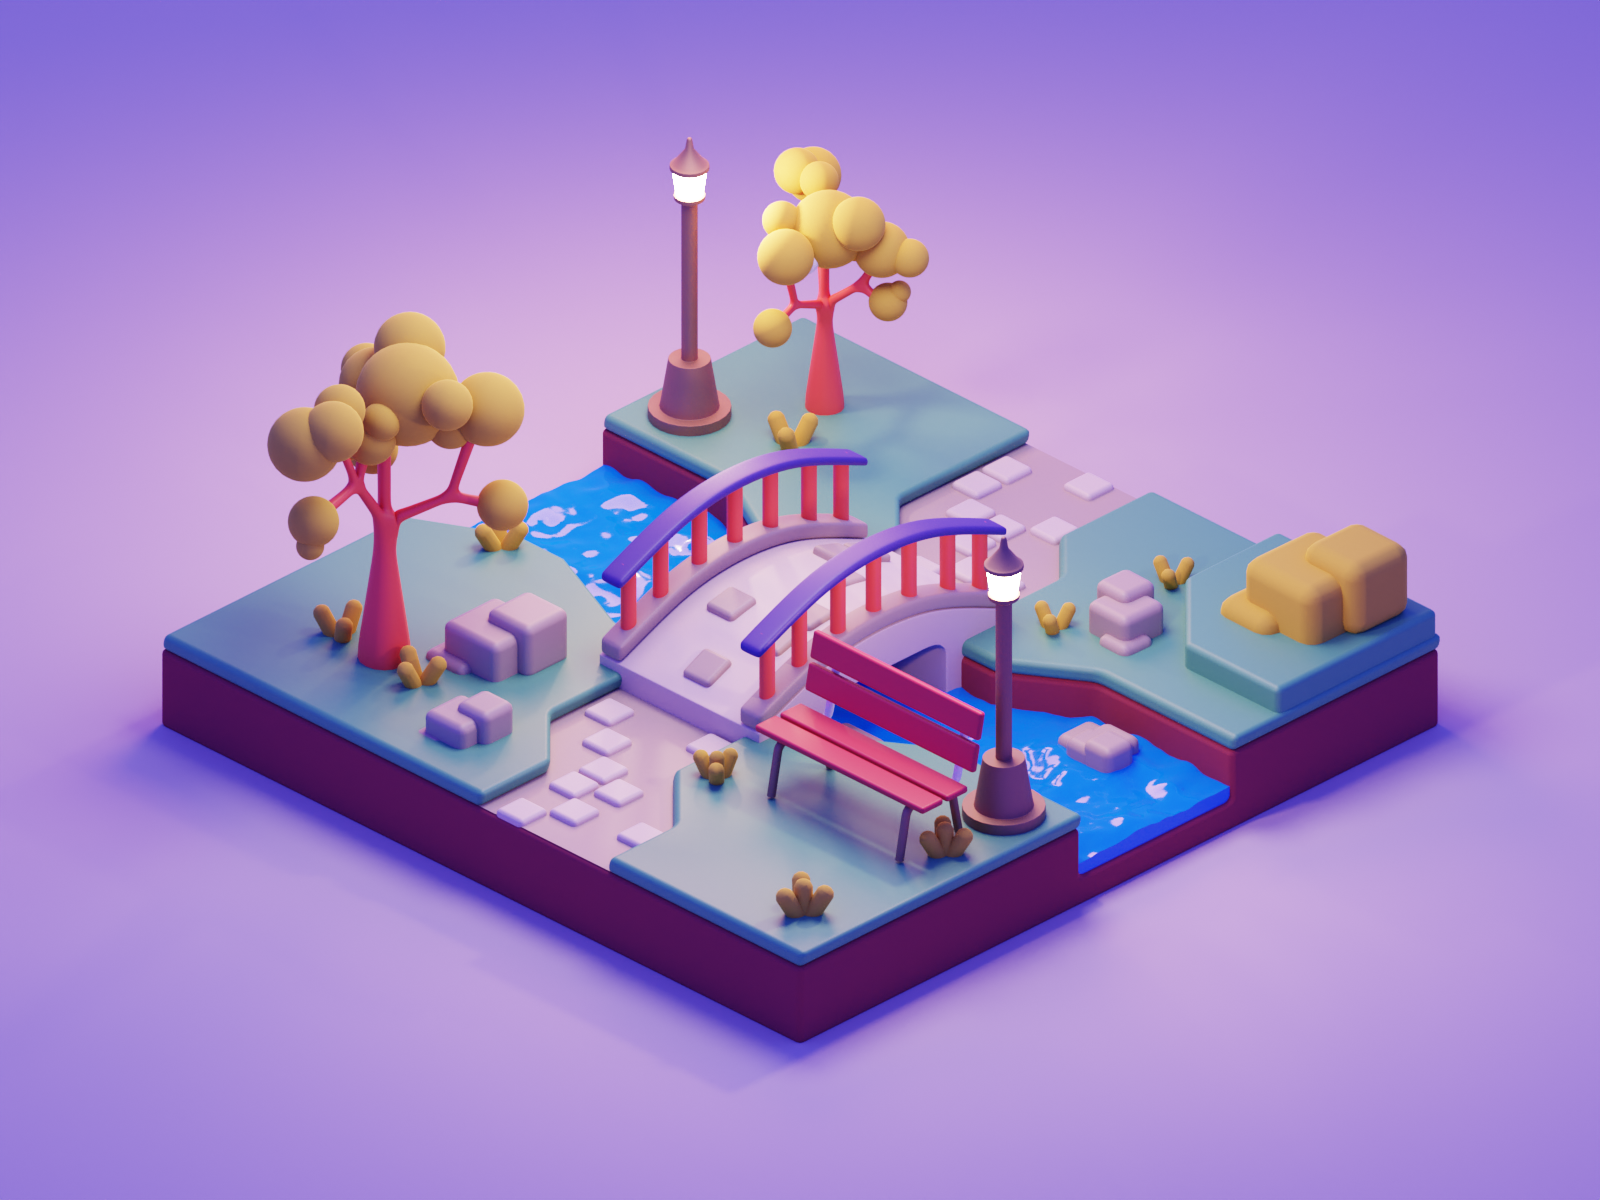 River Park by Stefy Spangenberg on Dribbble